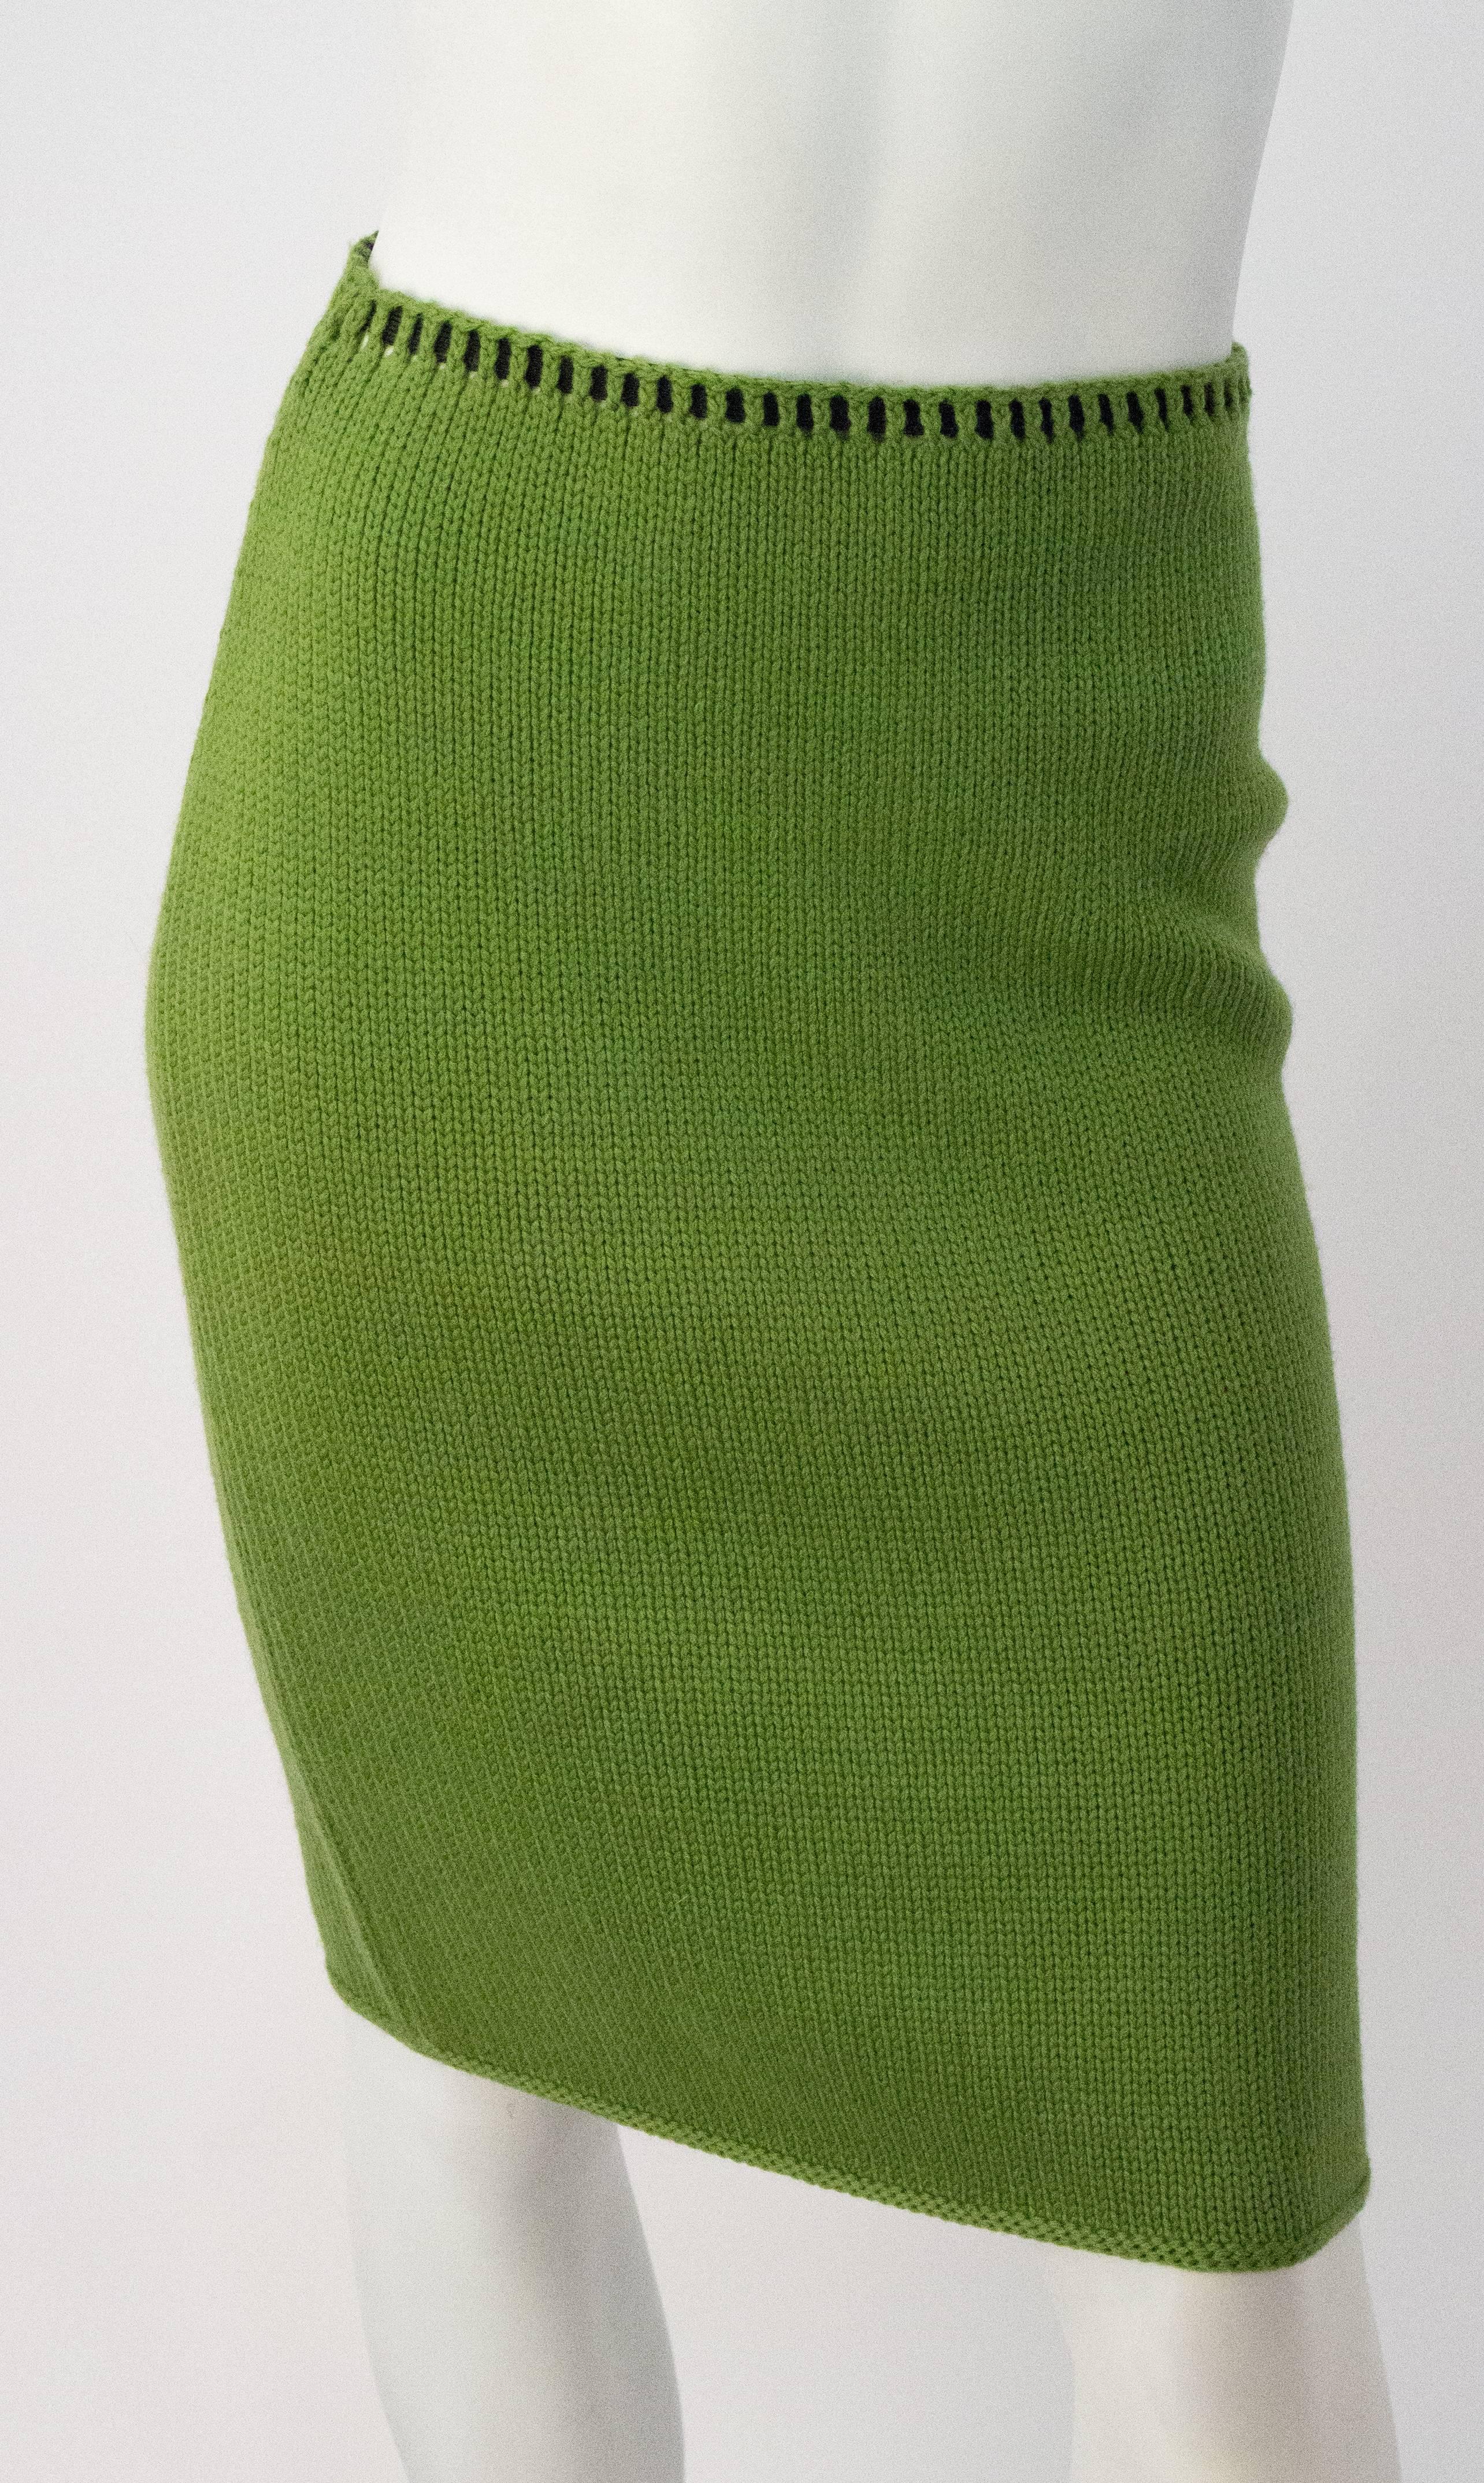 This is and early 70s St. John Knit Fern Green Sweater Skirt Set.   

Dress Measurements:

bust-

nape to waist-

arm hole depth-

back width-

neck size-

shoulder-

chest-

dress length-